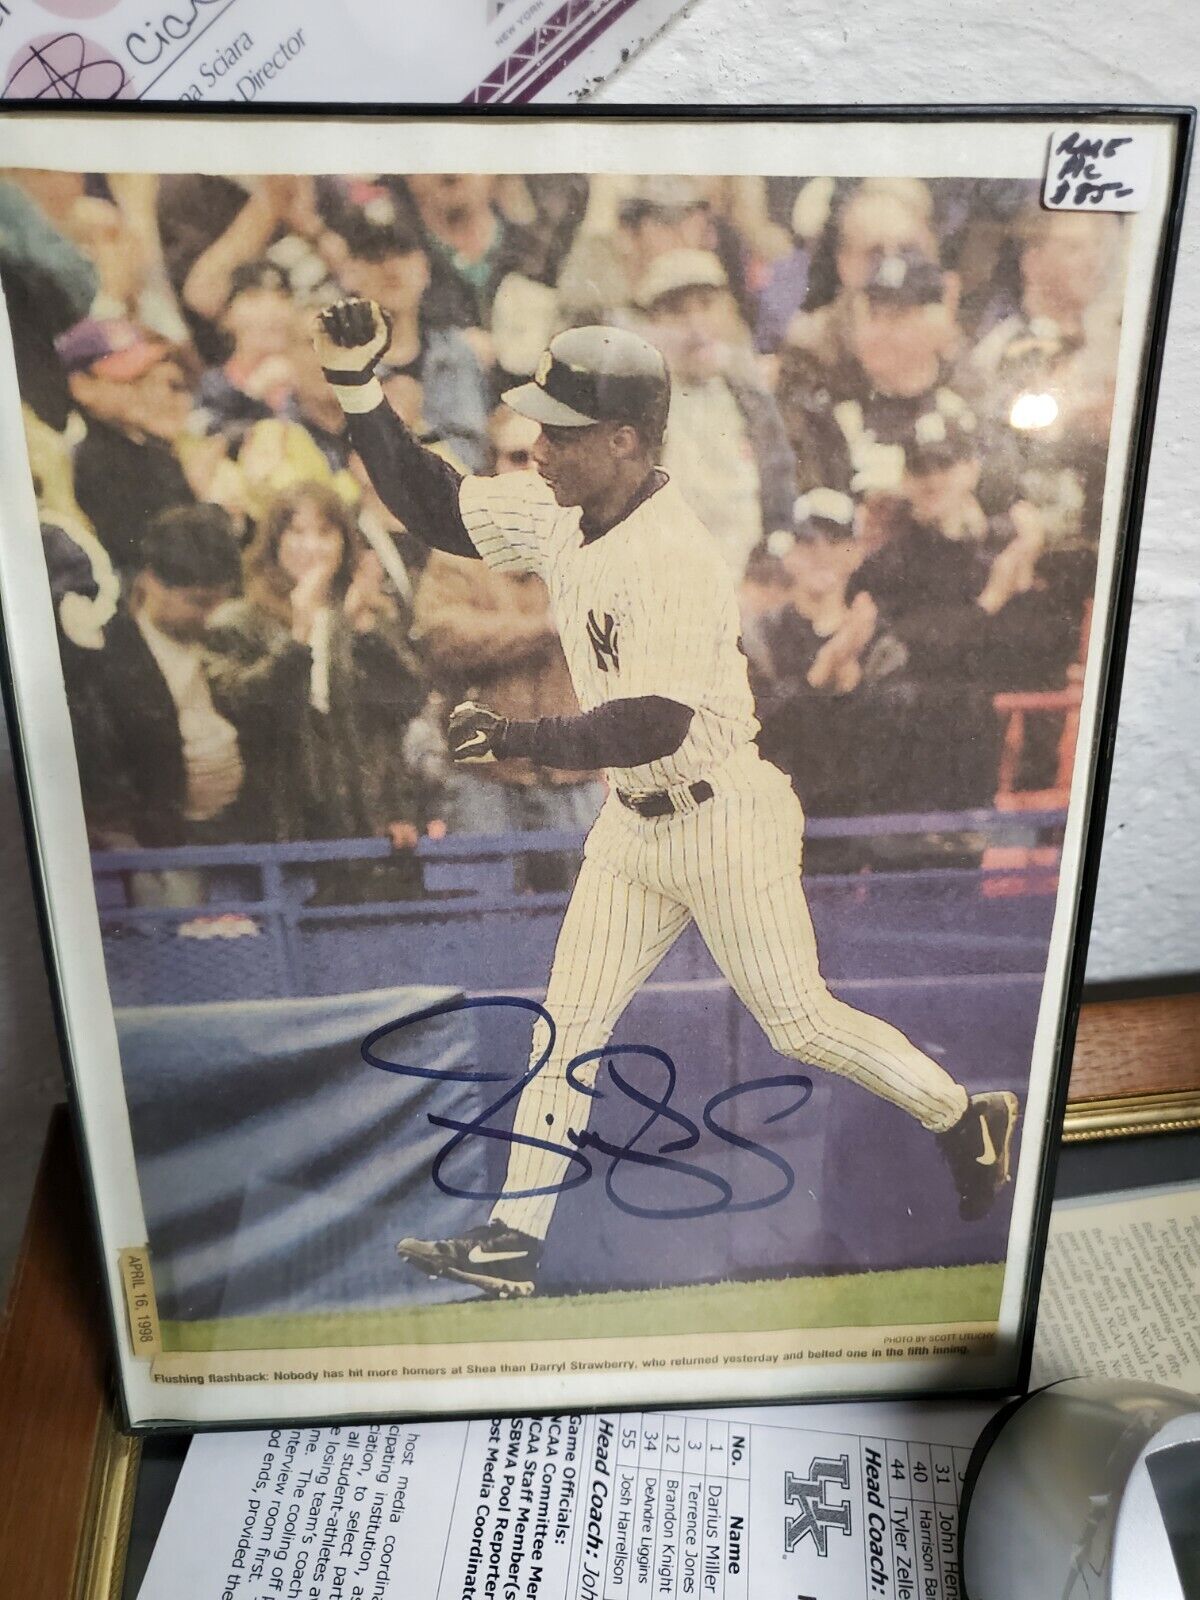 Darryl Strawberry Rare Signed Clip From Homer At Shea As A Yankee In Pinstripes